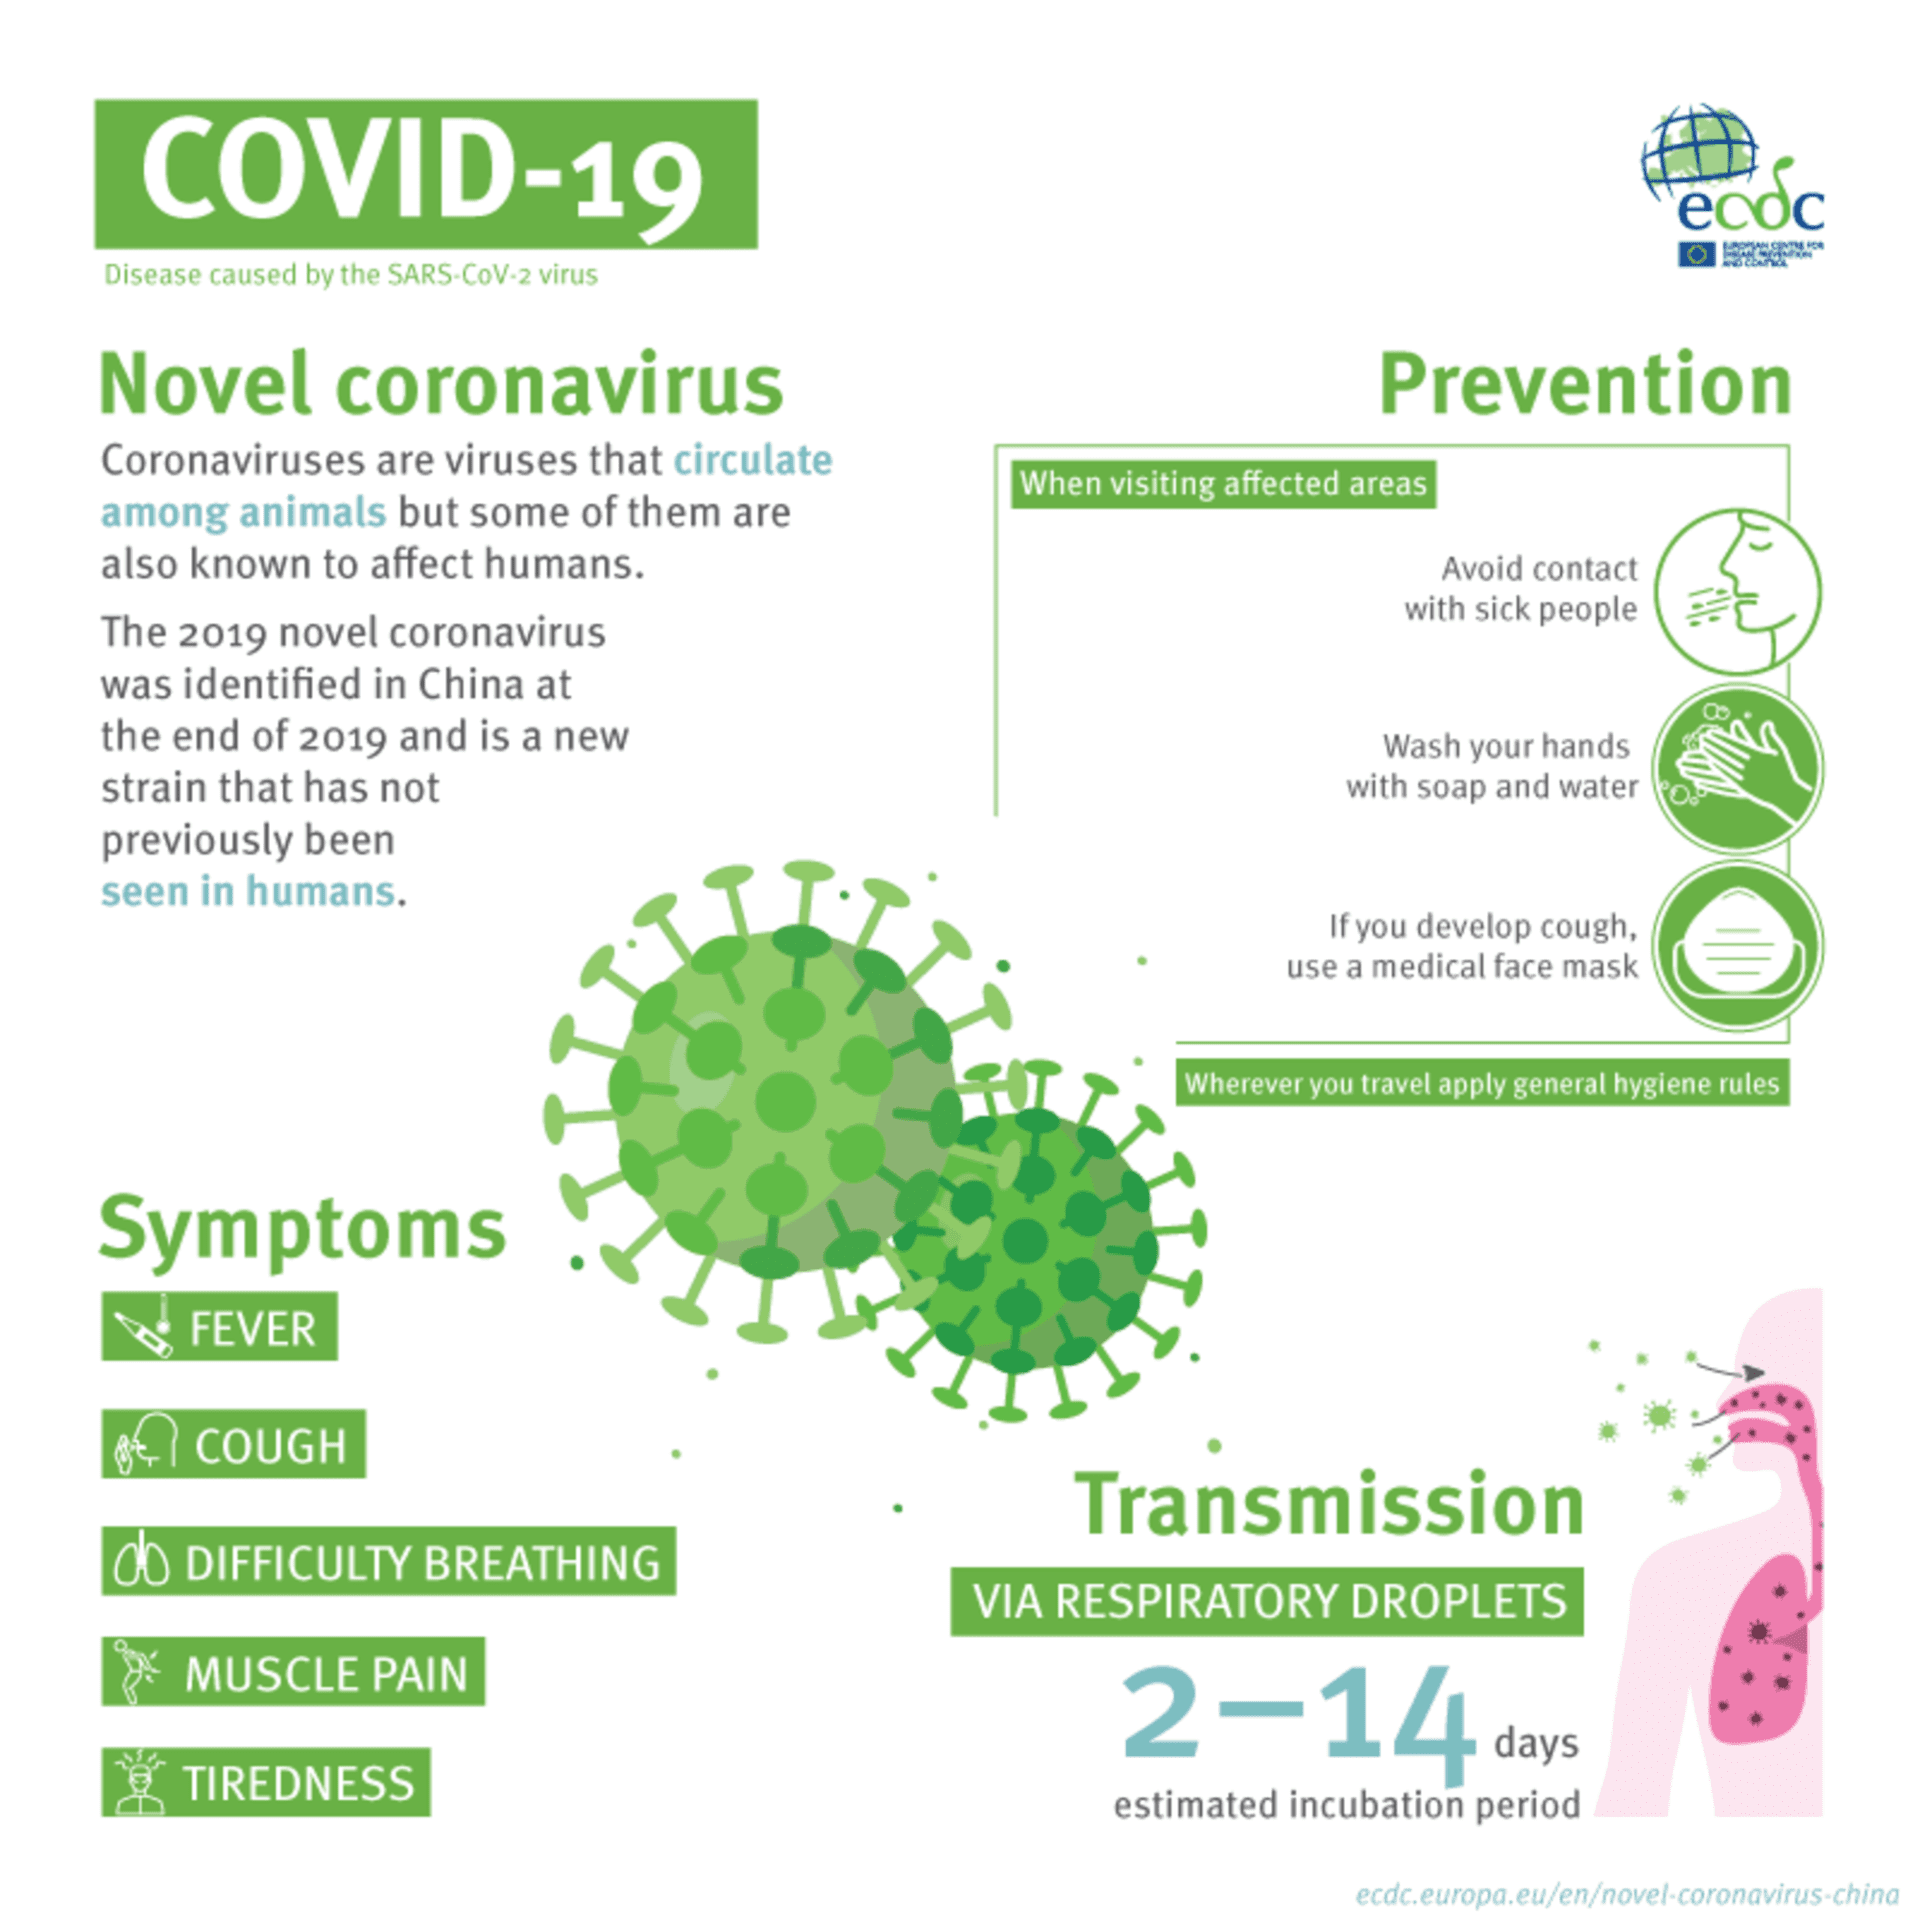 COVID-19 Disease caused by the SARS-CoV-2 virus